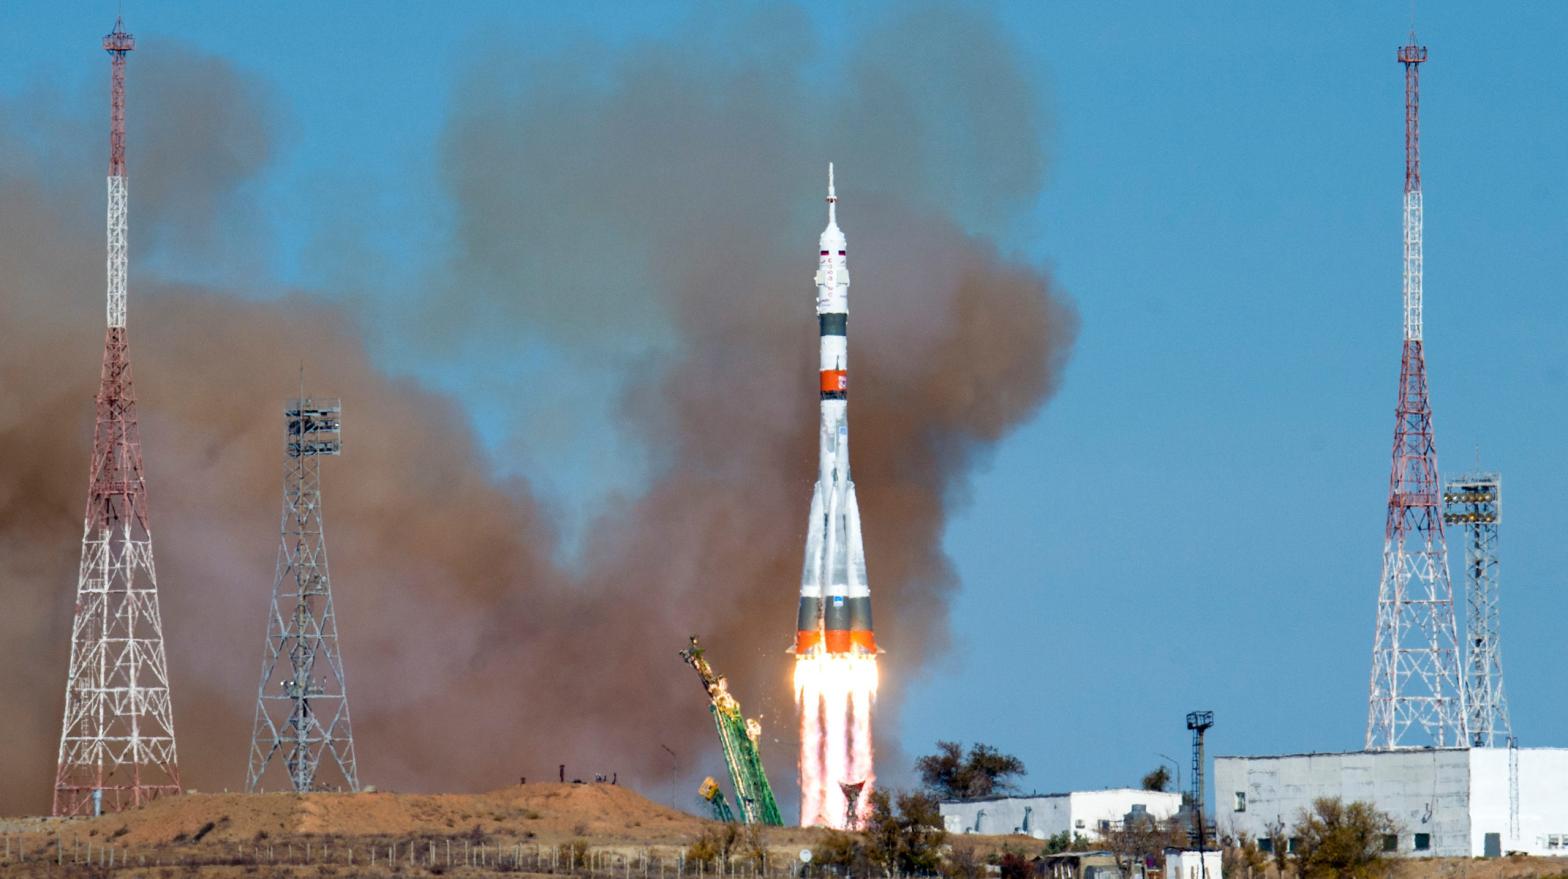 Today's launch of a Soyuz rocket from the Baikonur Cosmodrome in Kazakhstan. (Image: NASA/GCTC/Andrey Shelepin)